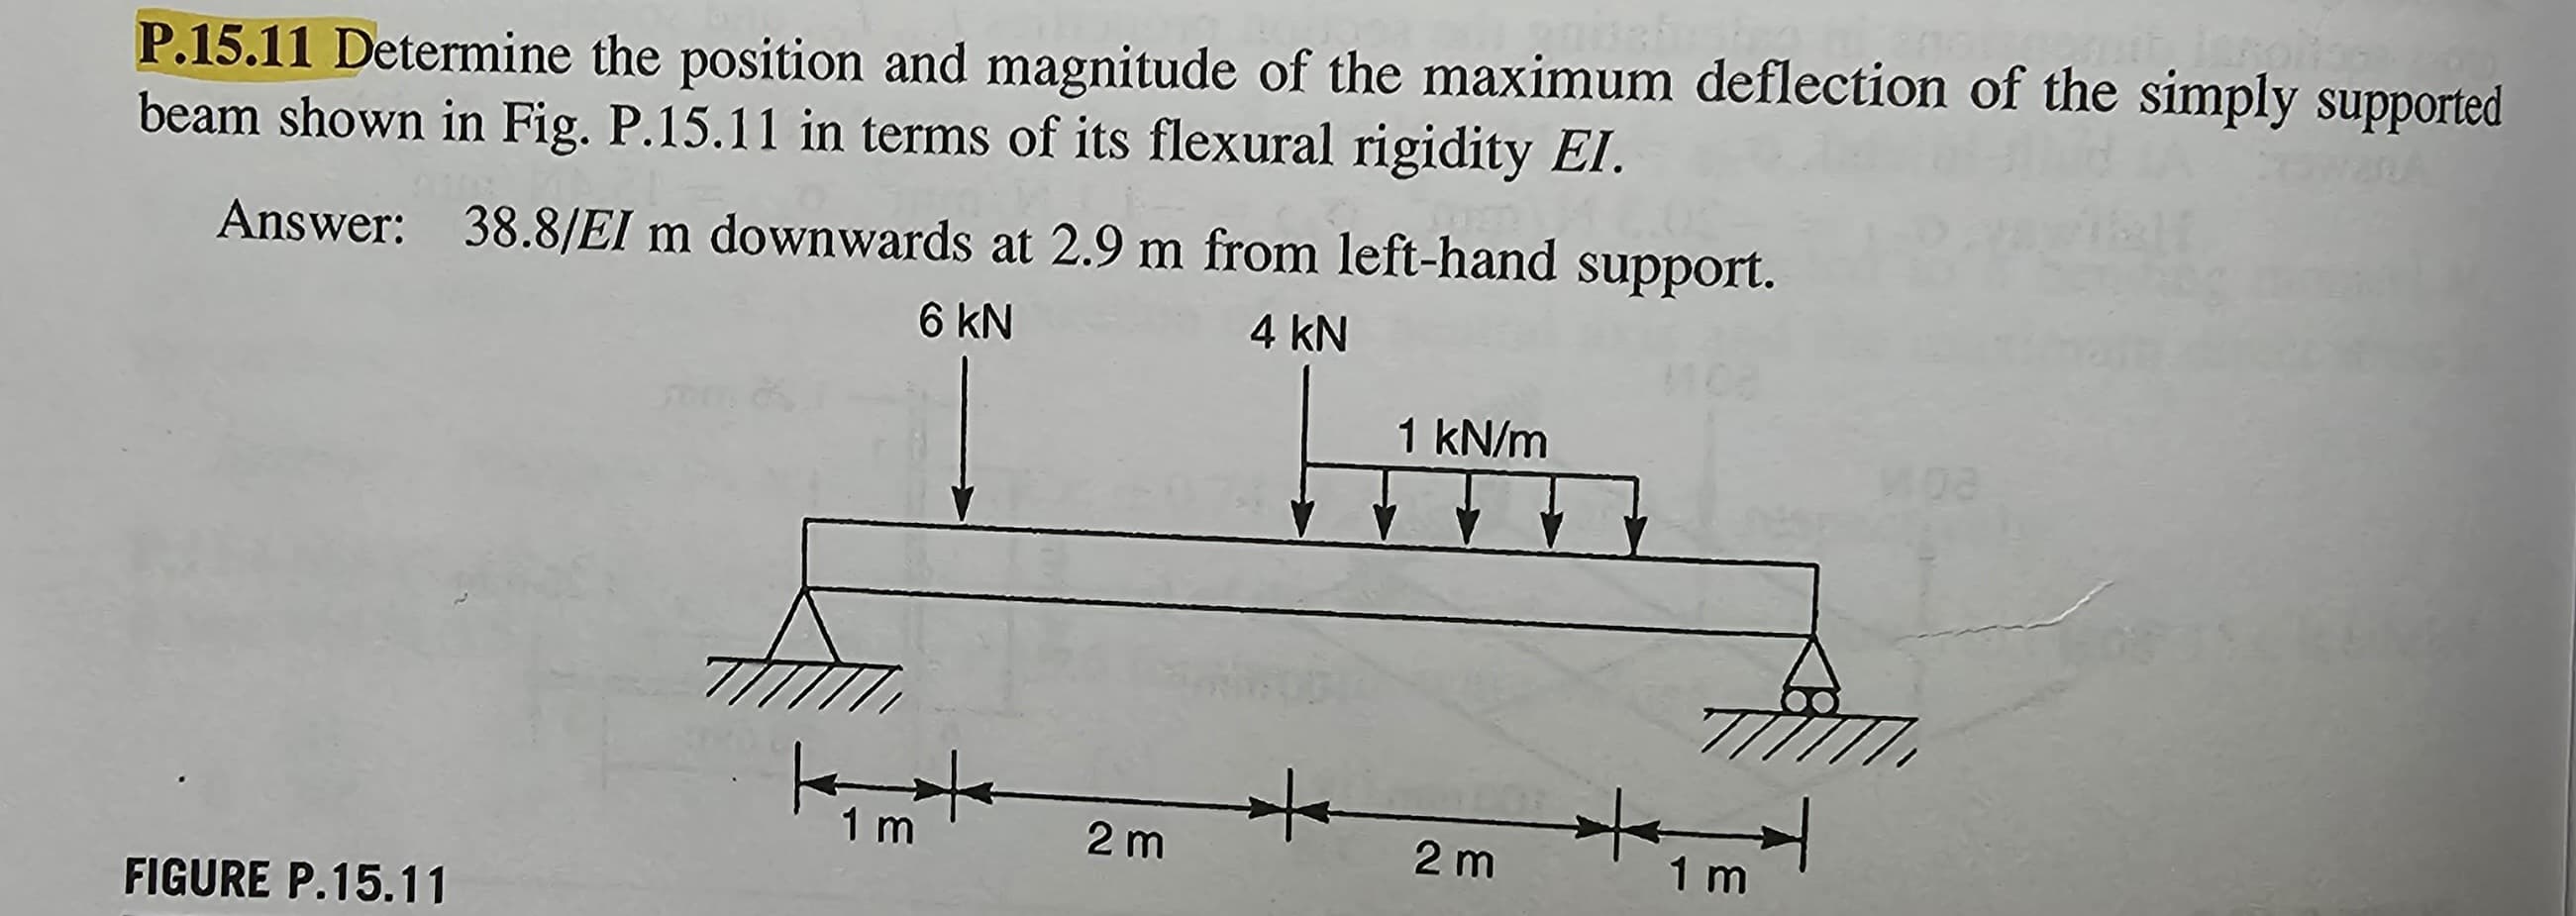 P.15.11 Determine the position and magnitude of the maximum deflection of the simply supported
beam shown in Fig. P.15.11 in terms of its flexural rigidity EI.
Answer: 38.8/EI m downwards at 2.9 m from left-hand support.
6 KN
4 kN
FIGURE P.15.11
K
1 m
2m
+
1 kN/m
2 m
1 m
H
605